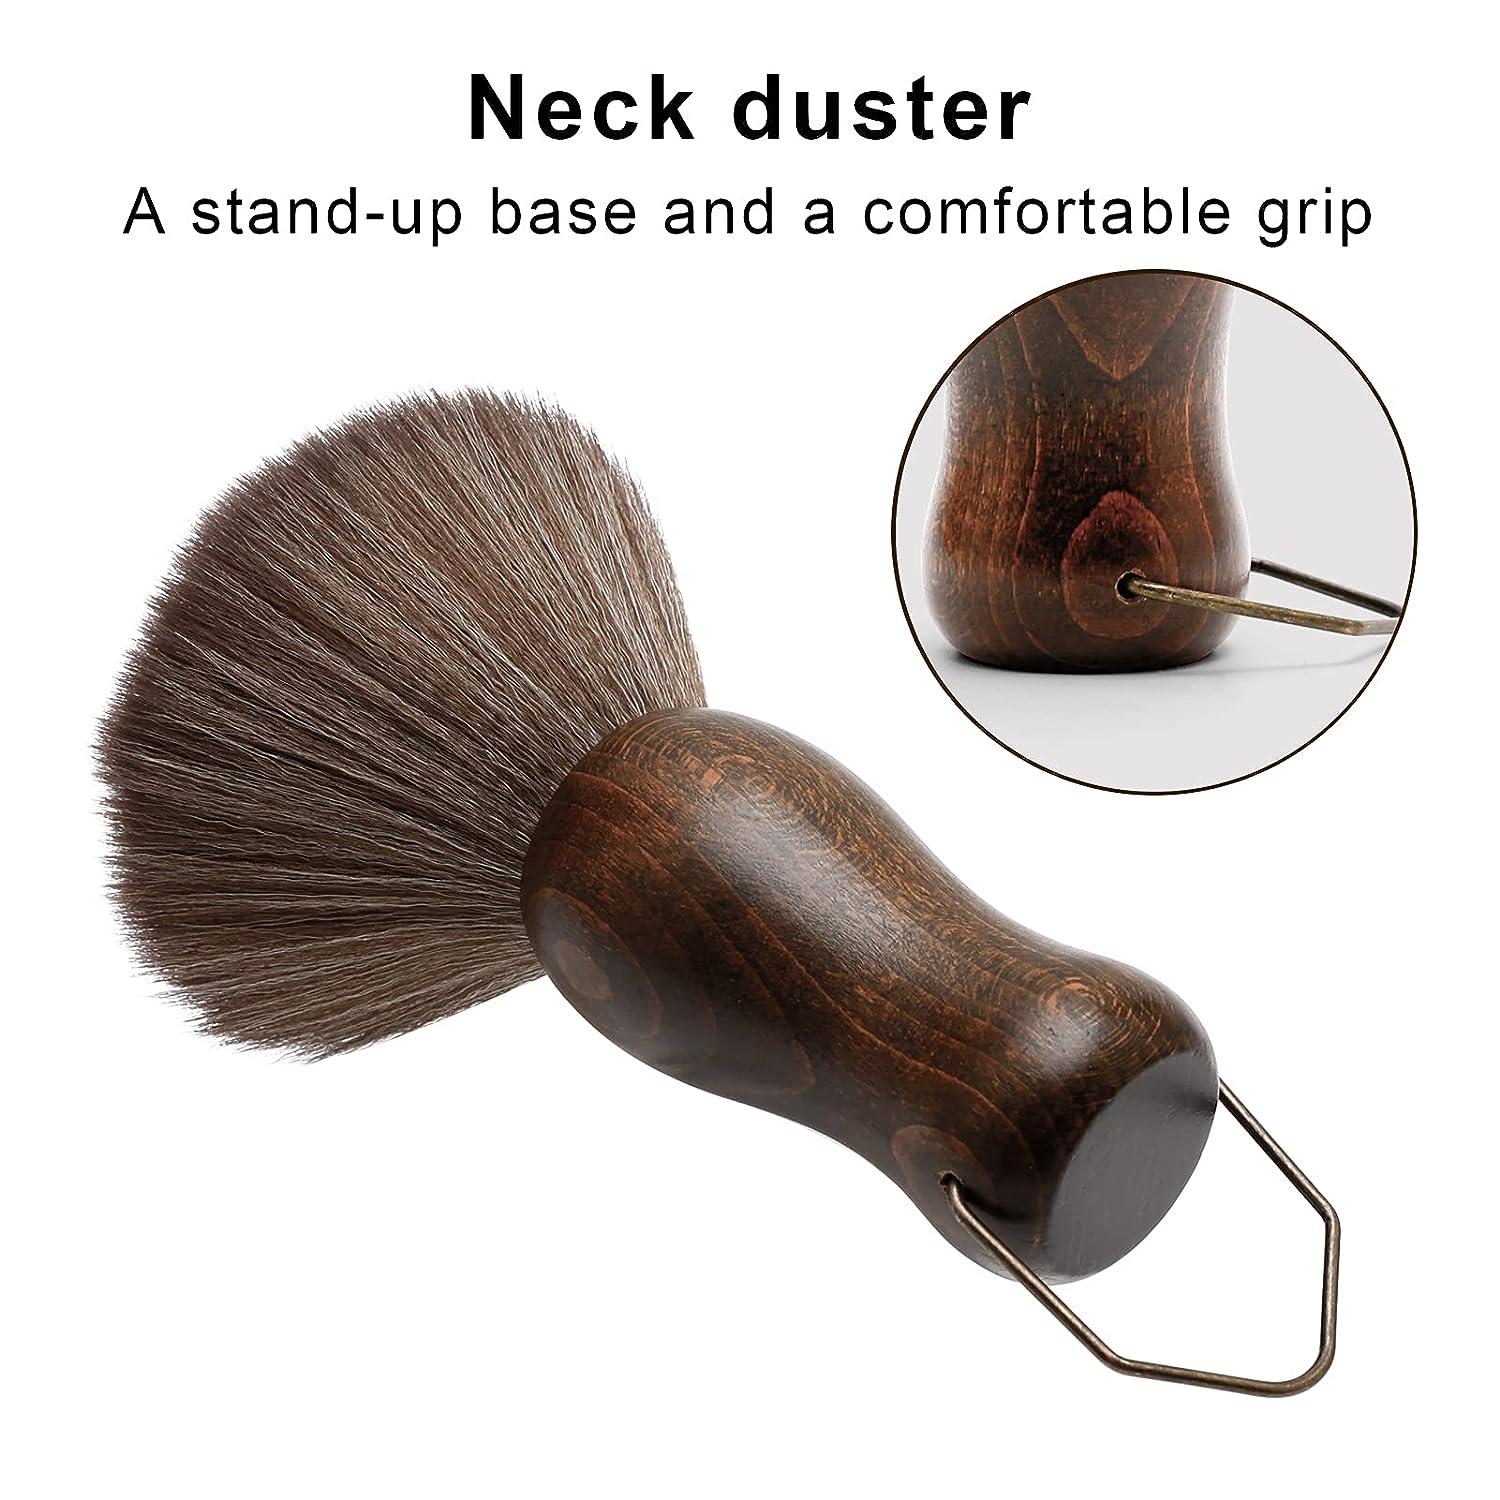 Duster with grip, white horse hair